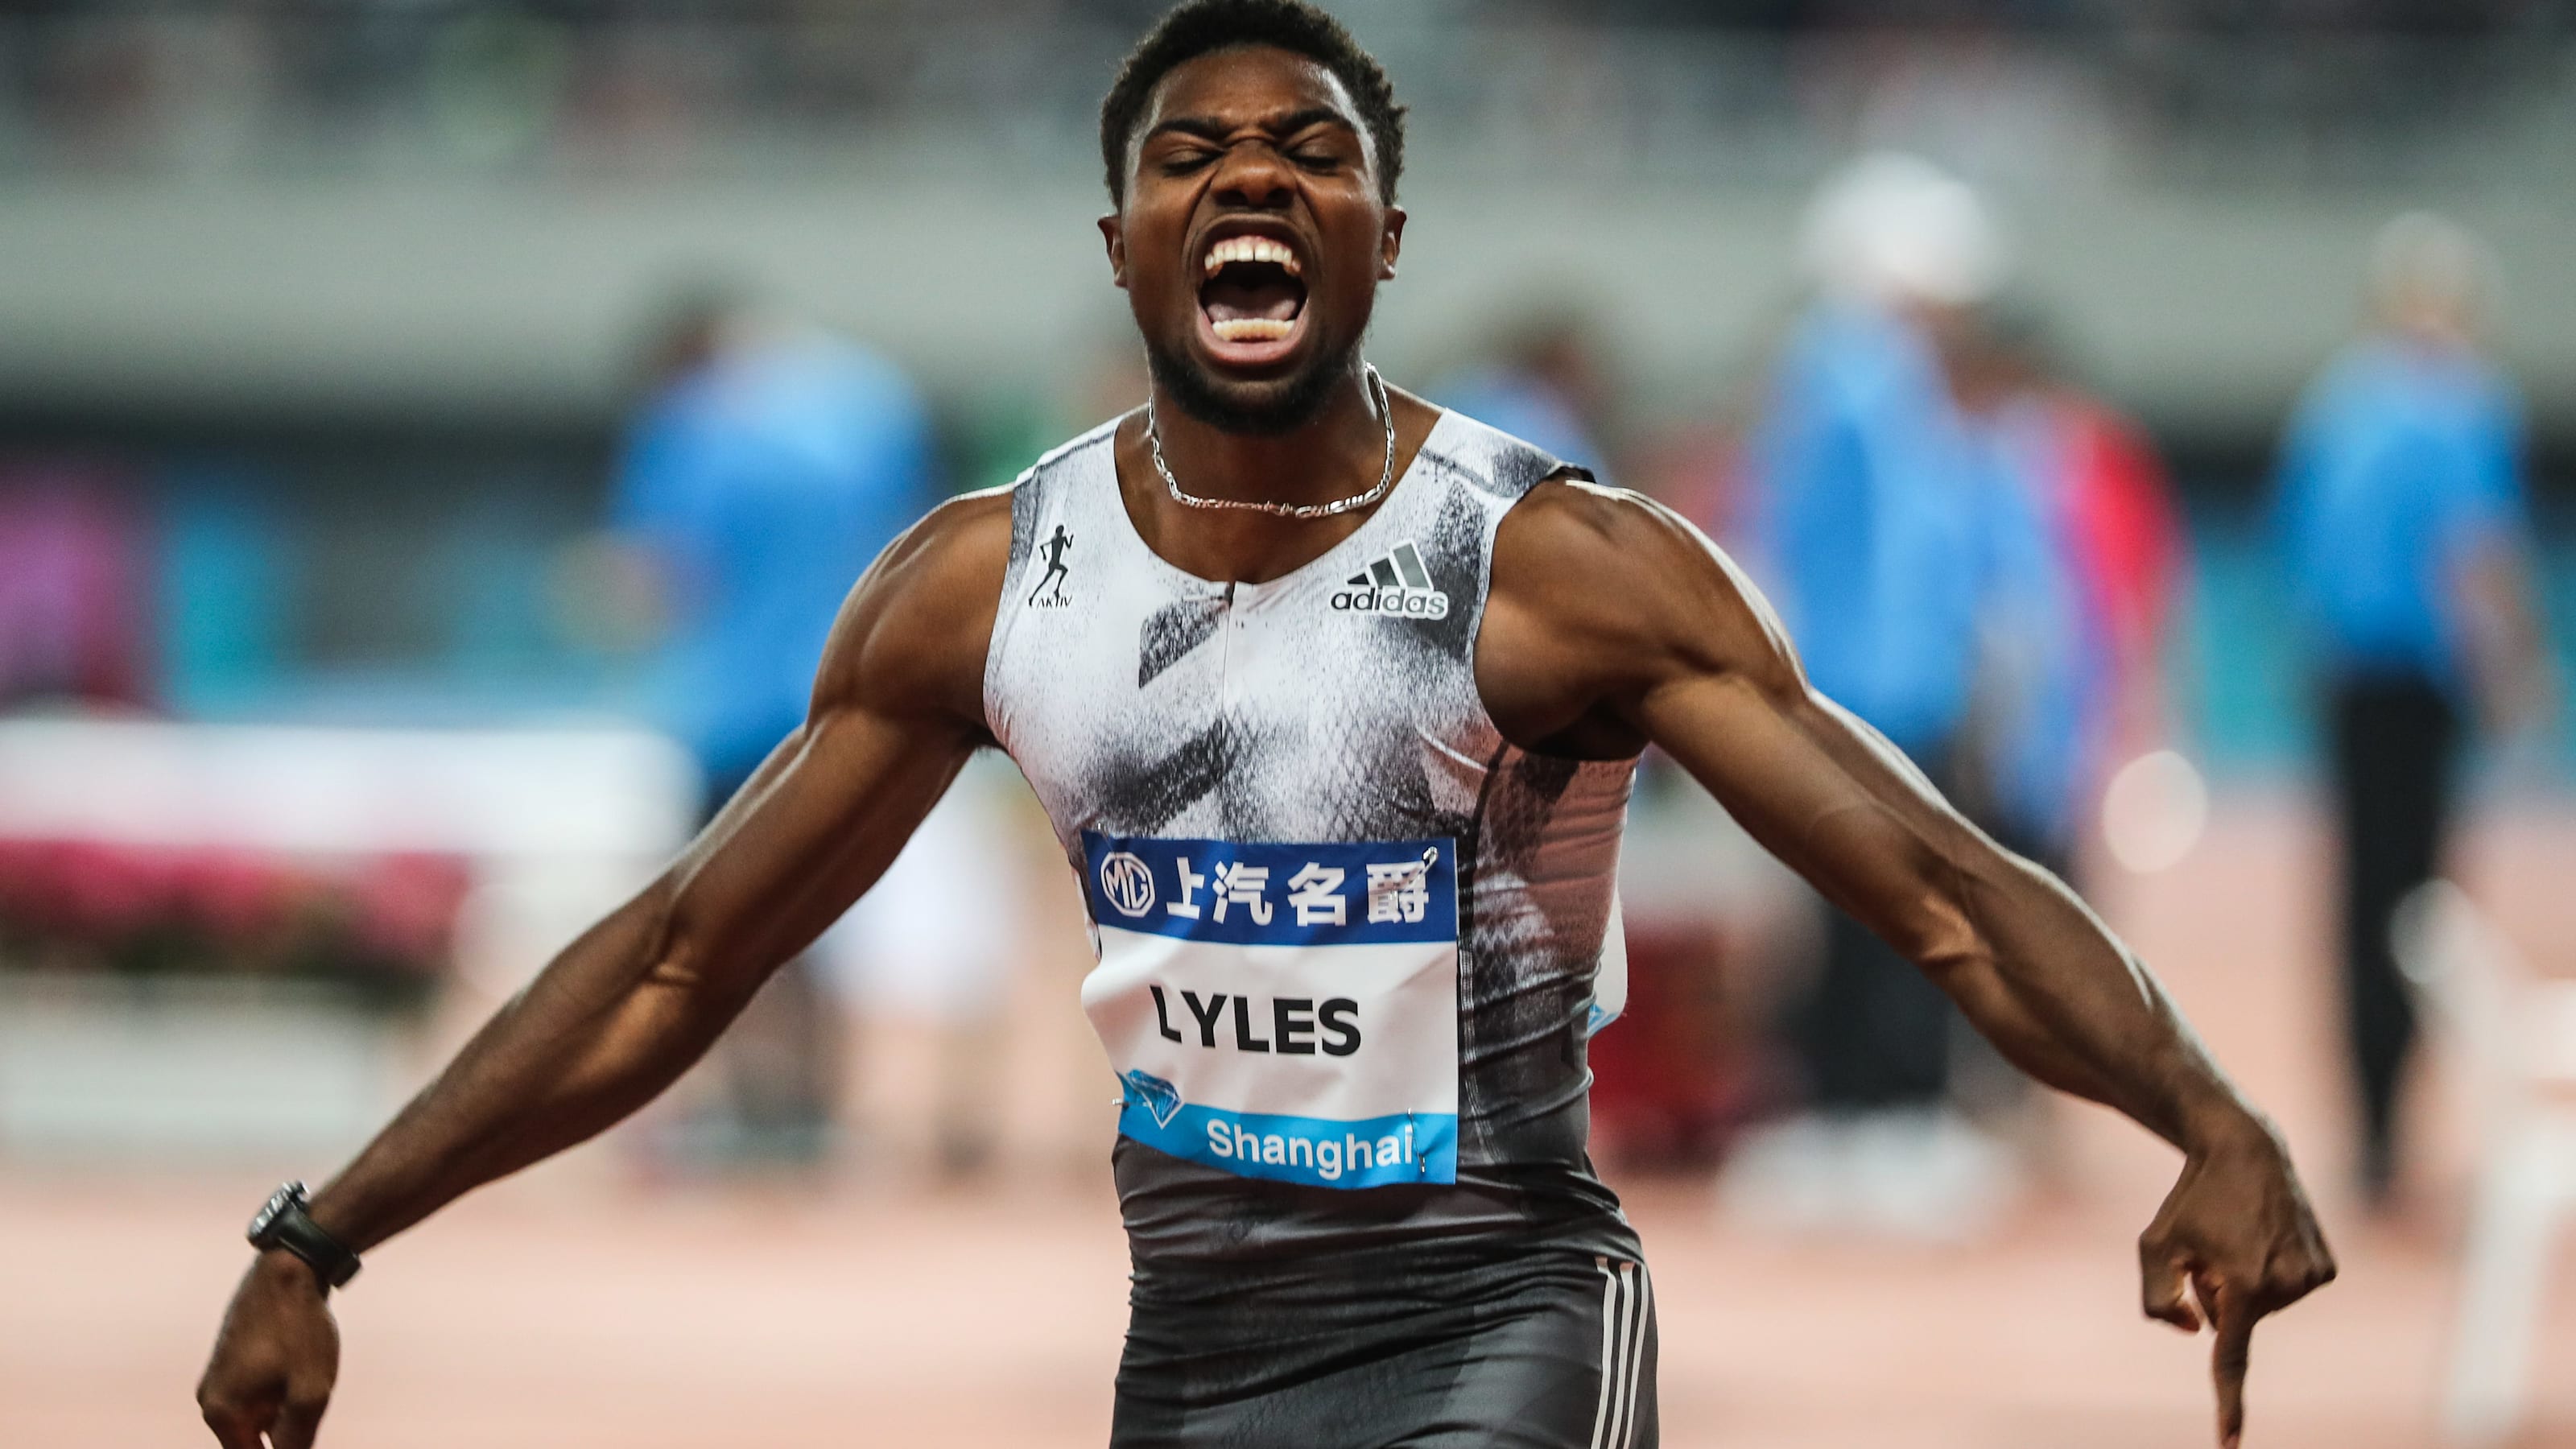 World Athletics Championships 2022 Day 5 LIVE: All eyes on Abel Kipsang in 1500m final, Noah Lyles and Shelly-Ann Fraser-Pryce in action in 200m men and women semifinal, follow LIVE UPDATES